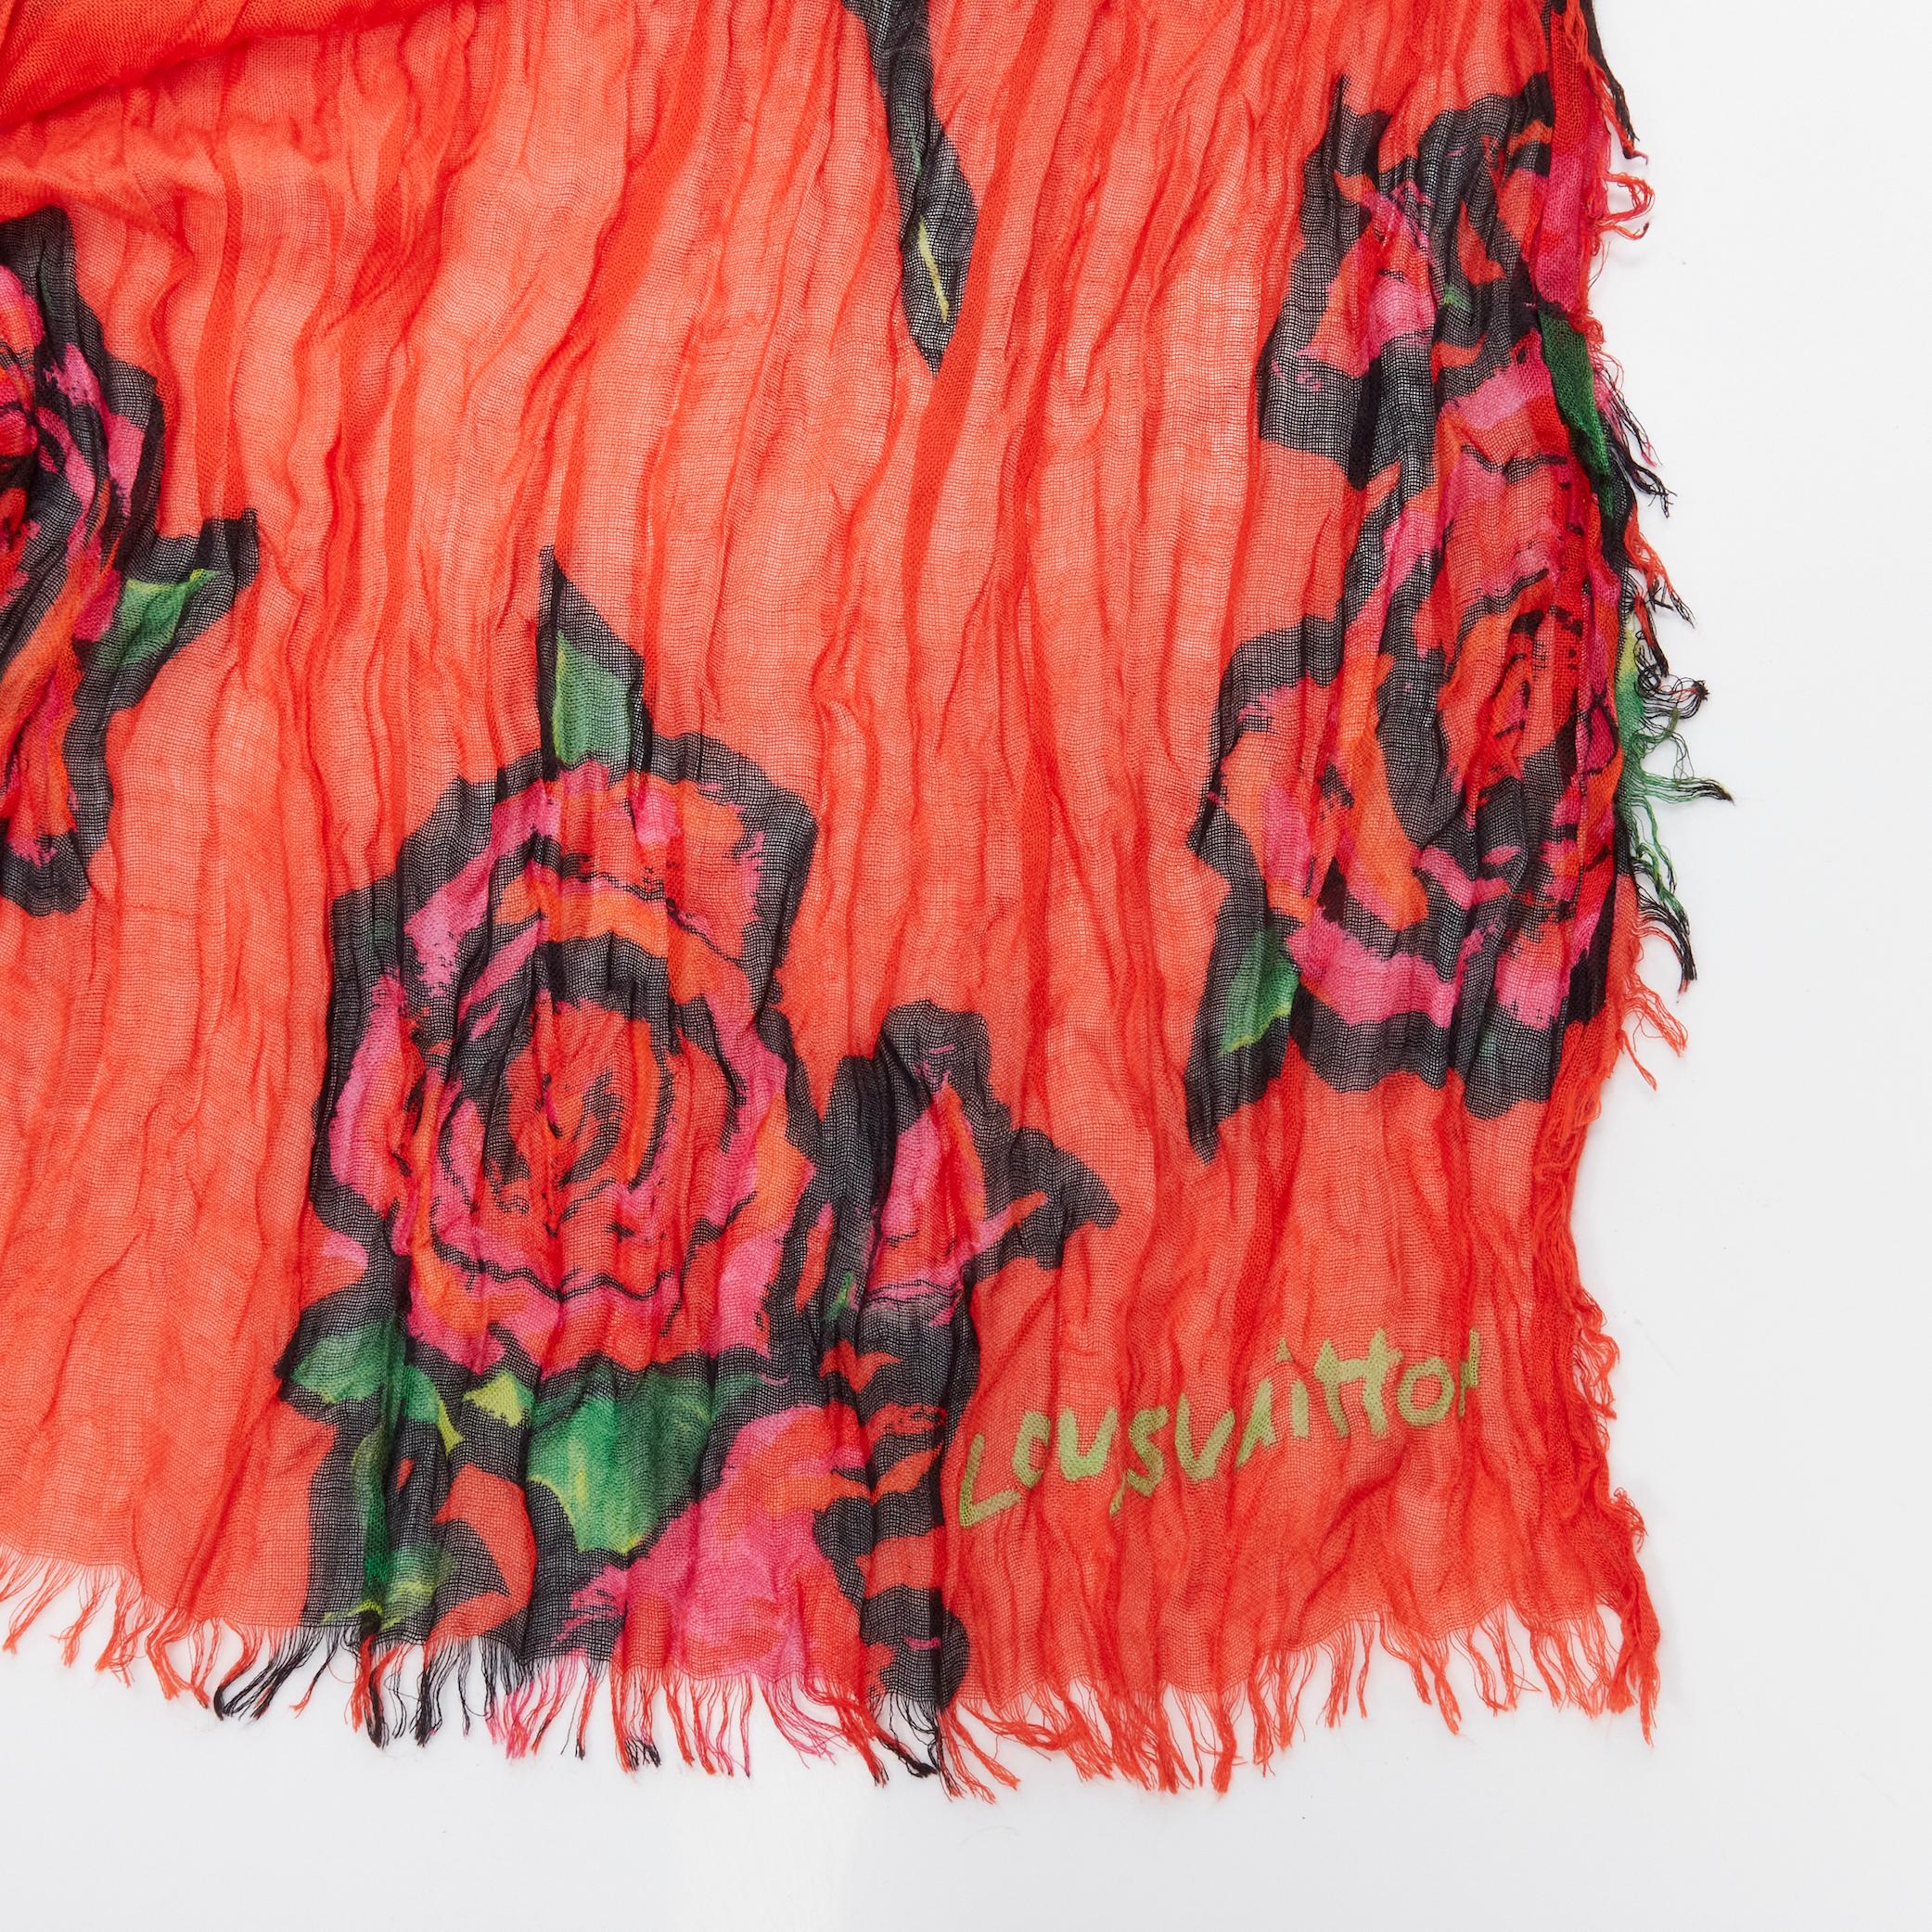 rare LOUIS VUITTON Stephen Sprouse cashmere silk red Graffiti Pop Rose scarf 
Reference: ANWU/A00576 
Brand: Louis Vuitton 
Designer: Marc Jacobs 
Collection: Stephen Sprouse 
Material: Cashmere 
Color: Red 
Pattern: Floral 
Extra Detail: Frayed